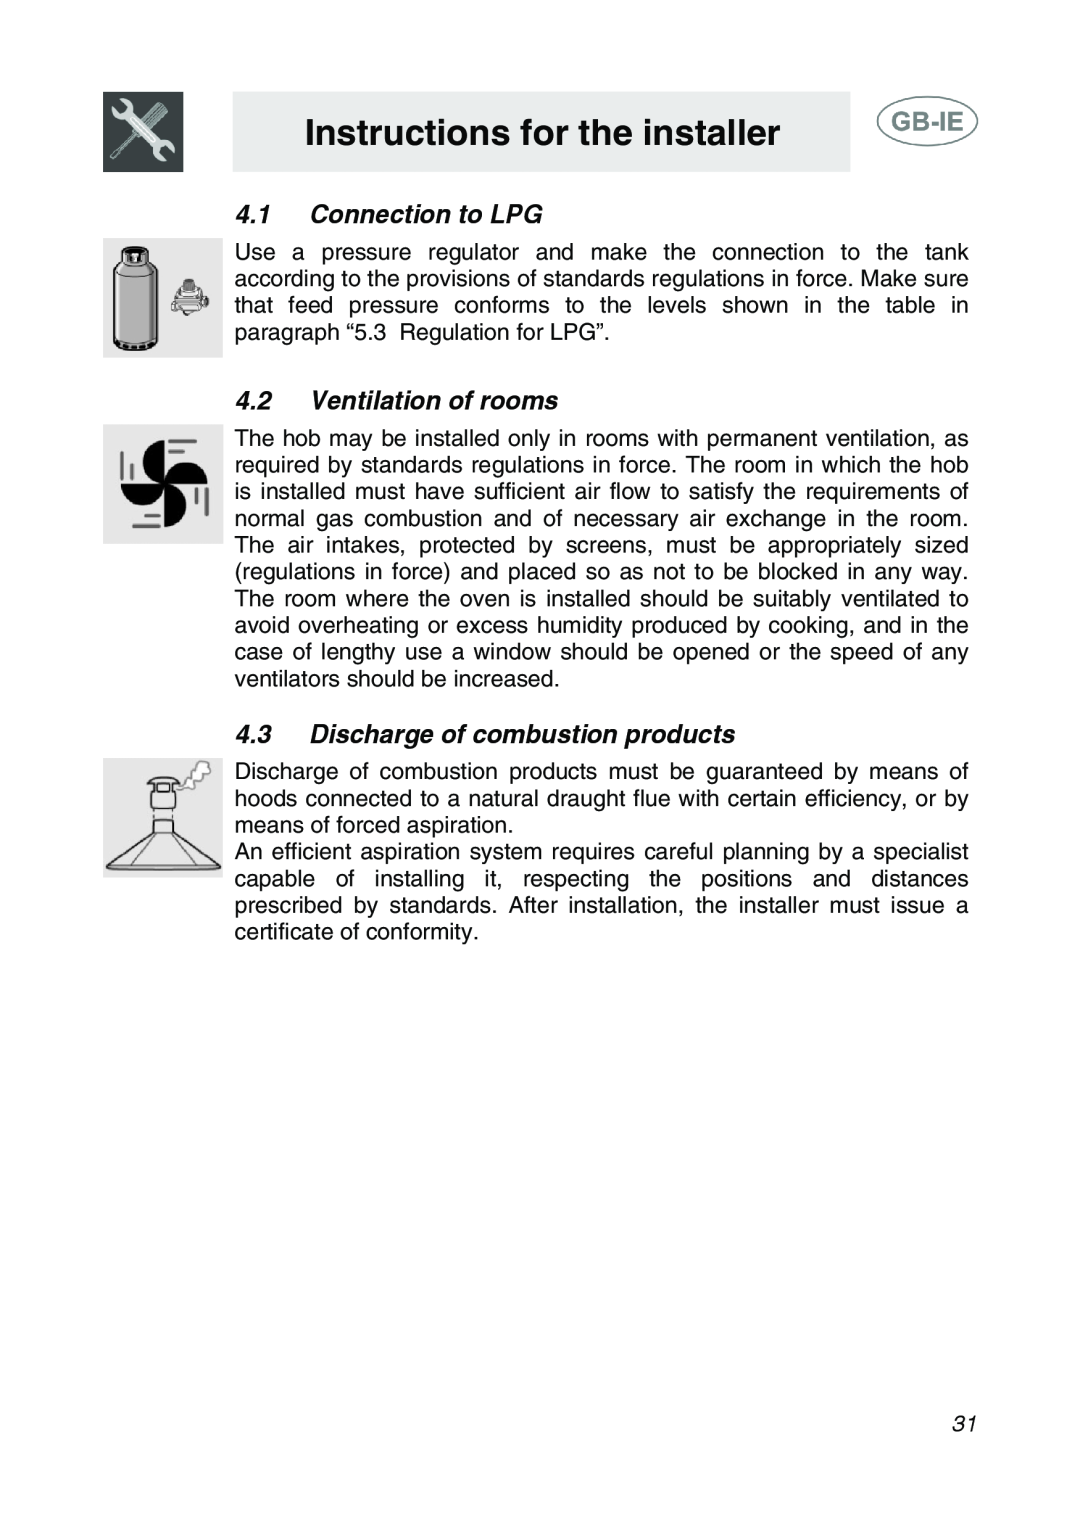 Smeg AP64S3 Connection to LPG, Ventilation of rooms, Discharge of combustion products, Instructions for the installer 